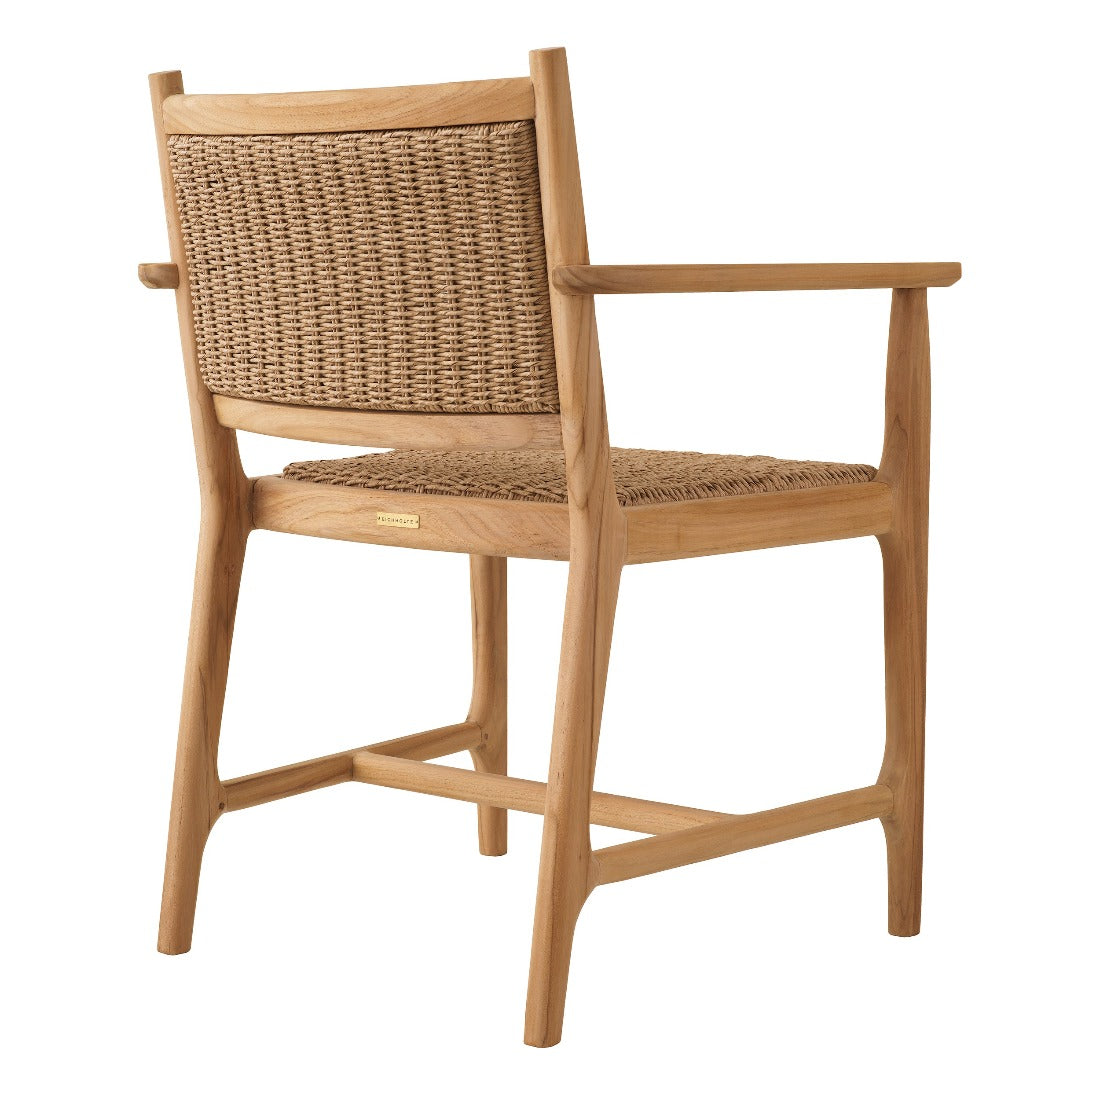 Outdoor dining chair Eichholtz Pivetti with arm Naturel